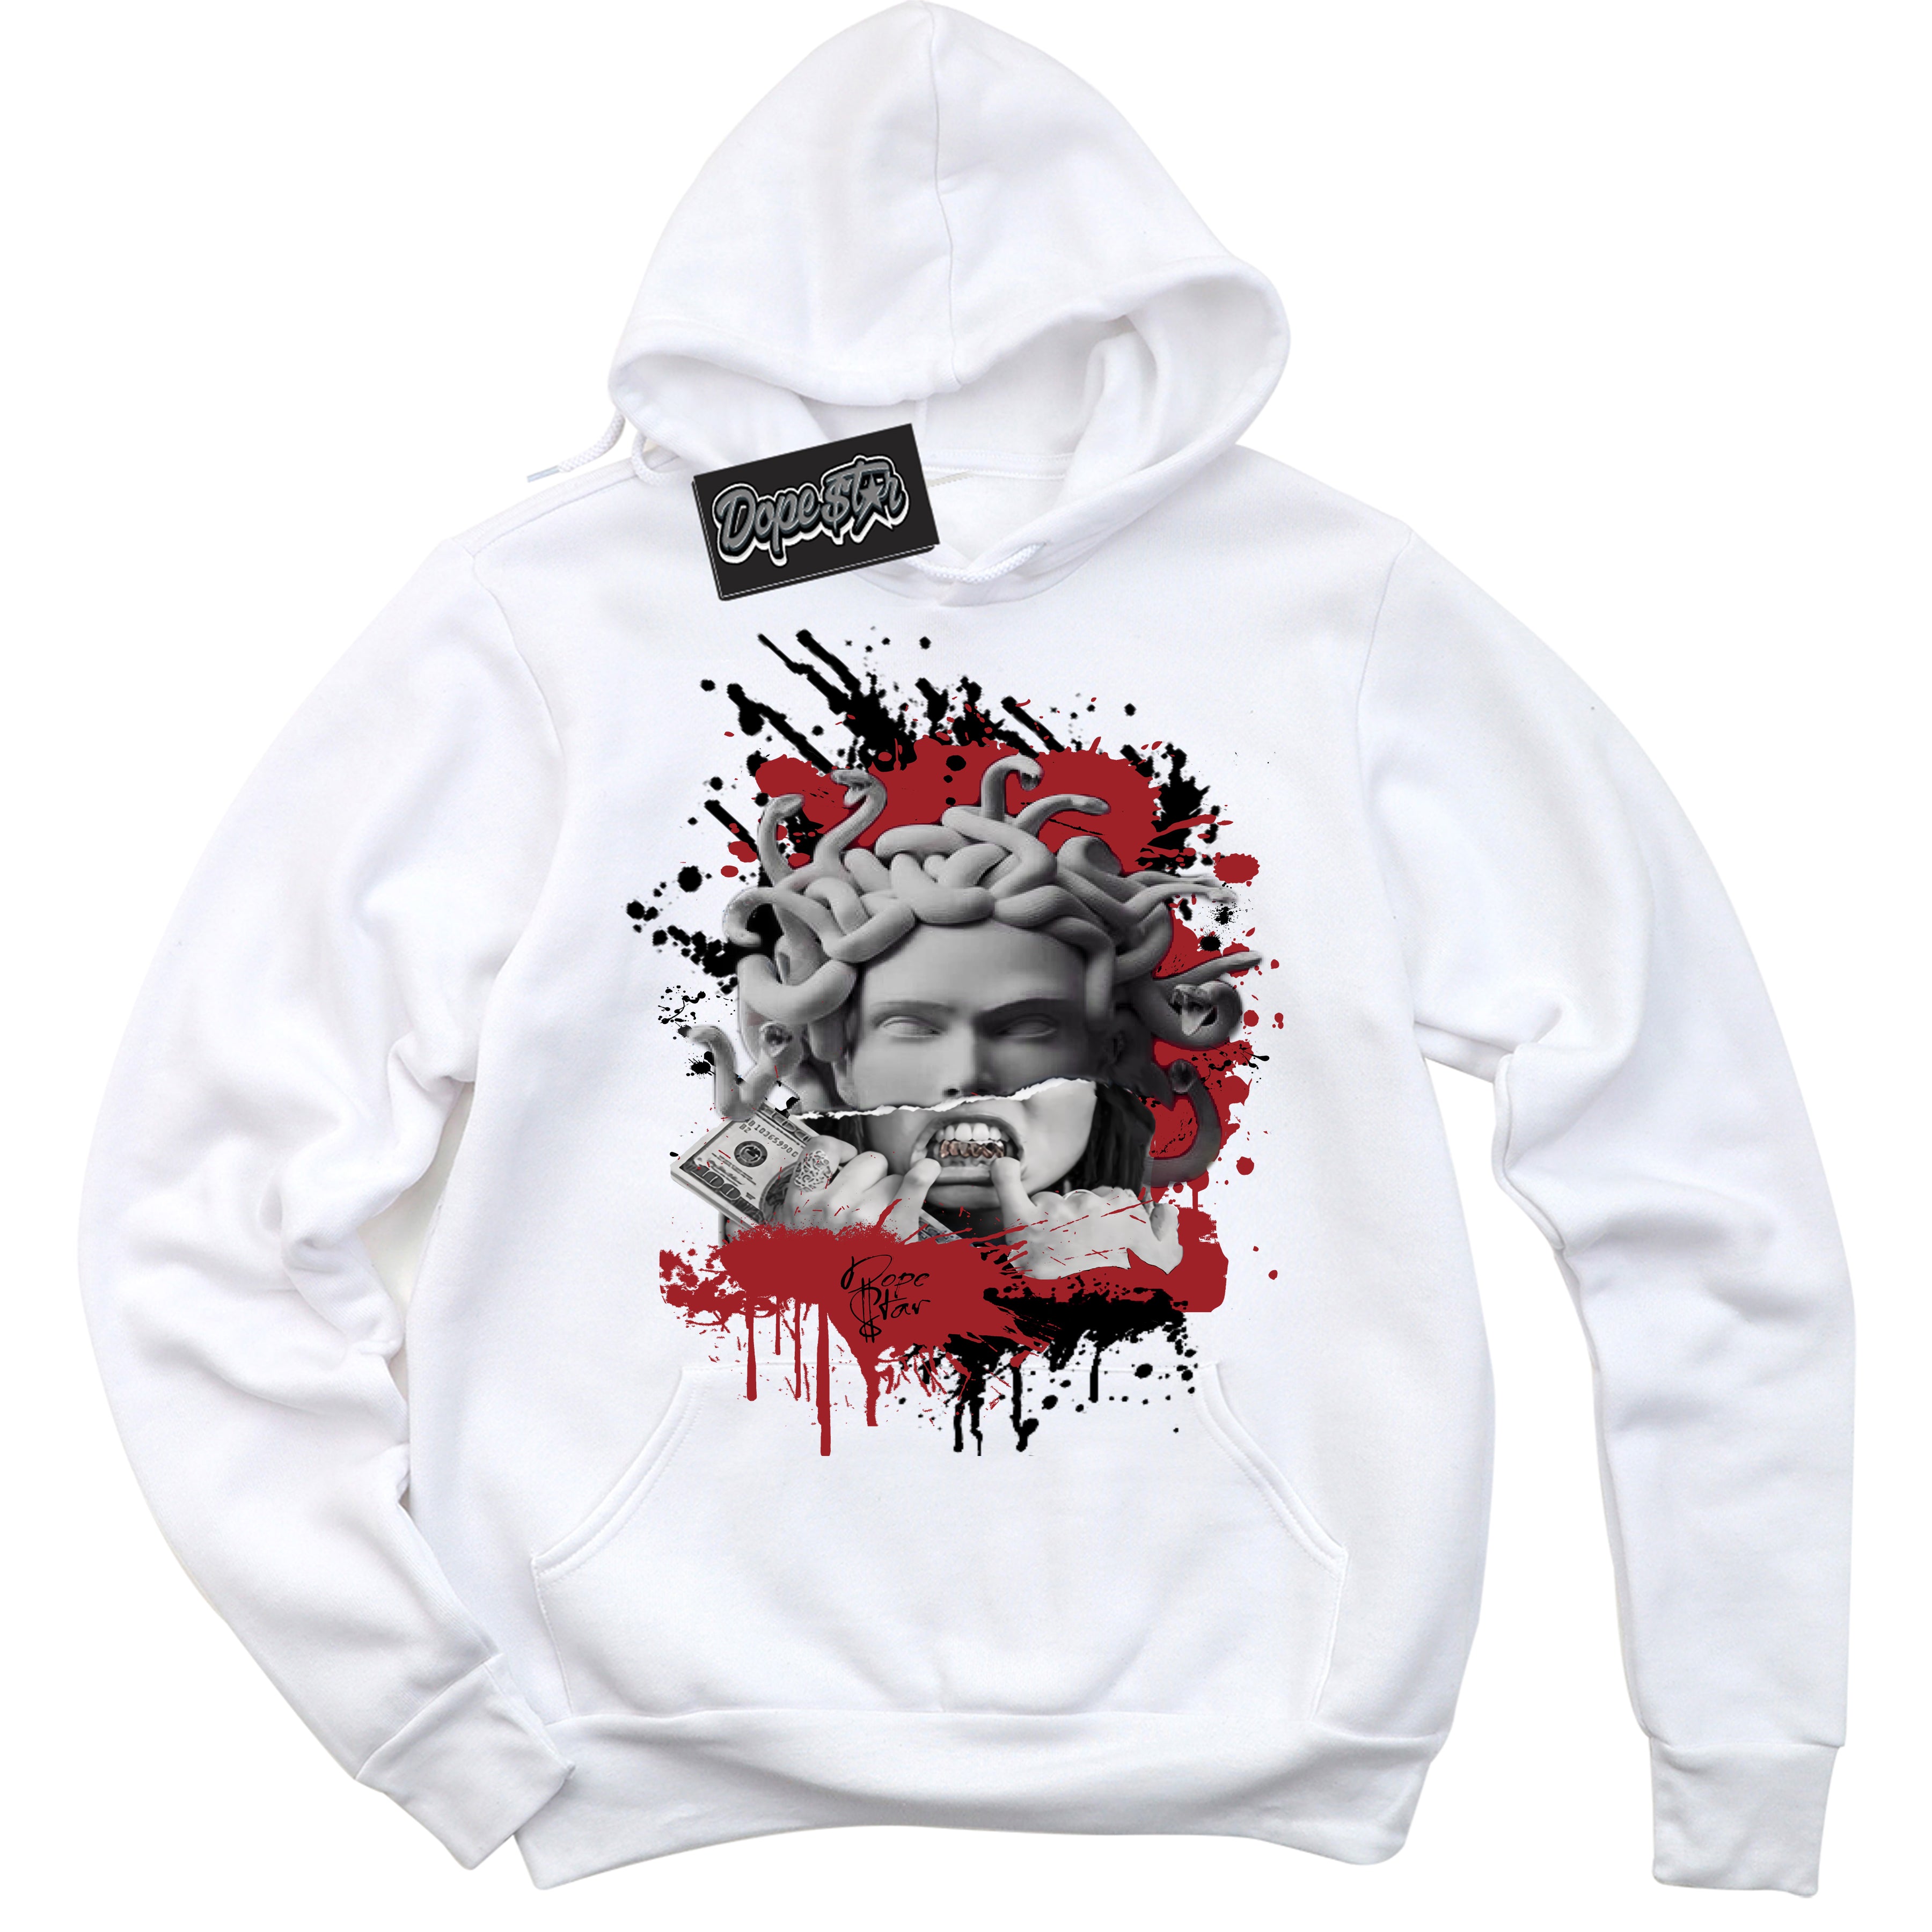 Cool White Hoodie With “ Medusa “  Design That Perfectly Matches Lost And Found 1s Sneakers.